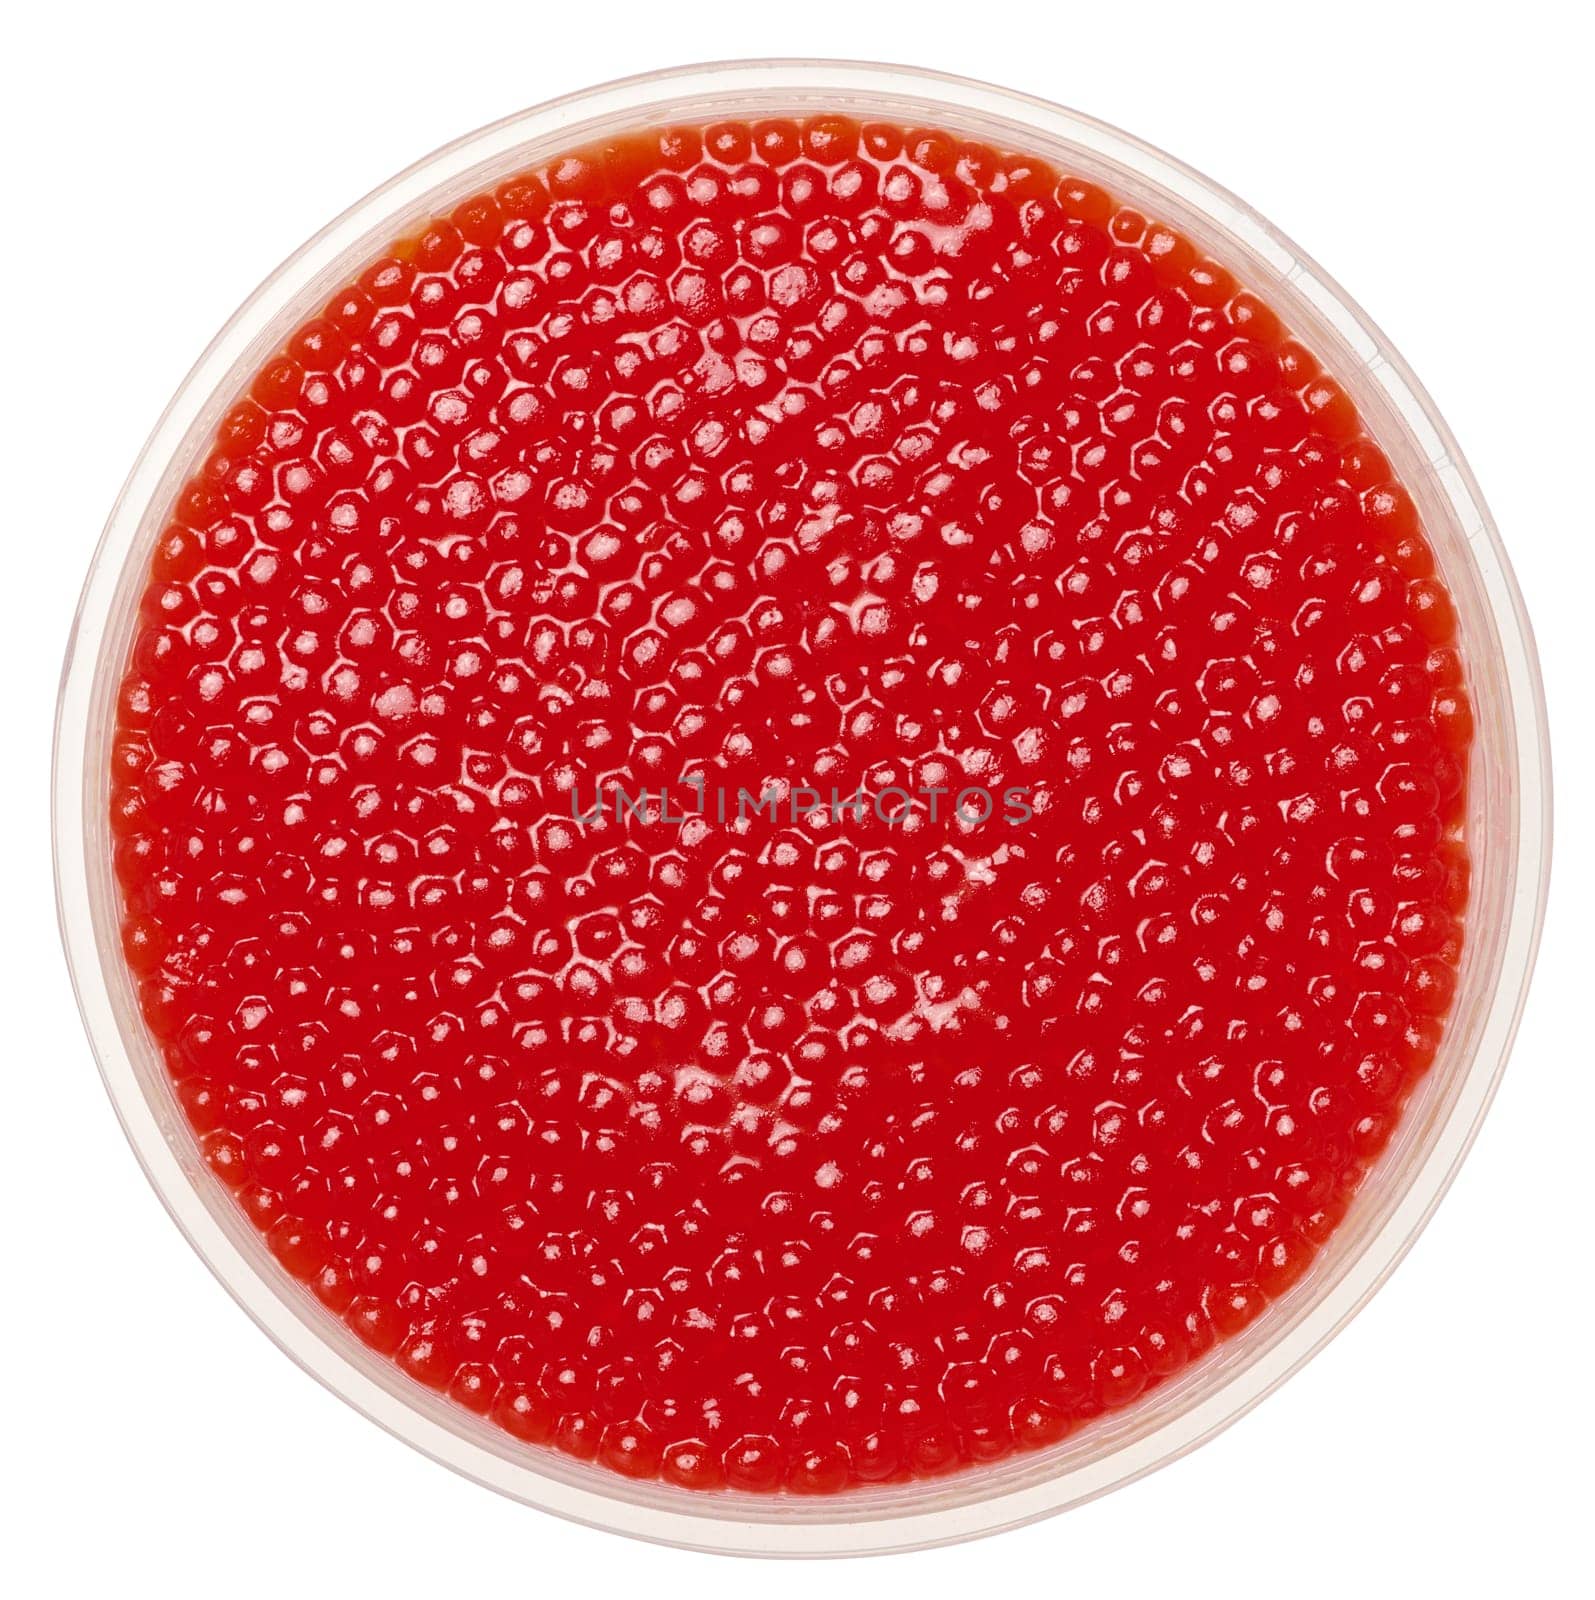 Red caviar in a plastic bowl on an isolated background, top view